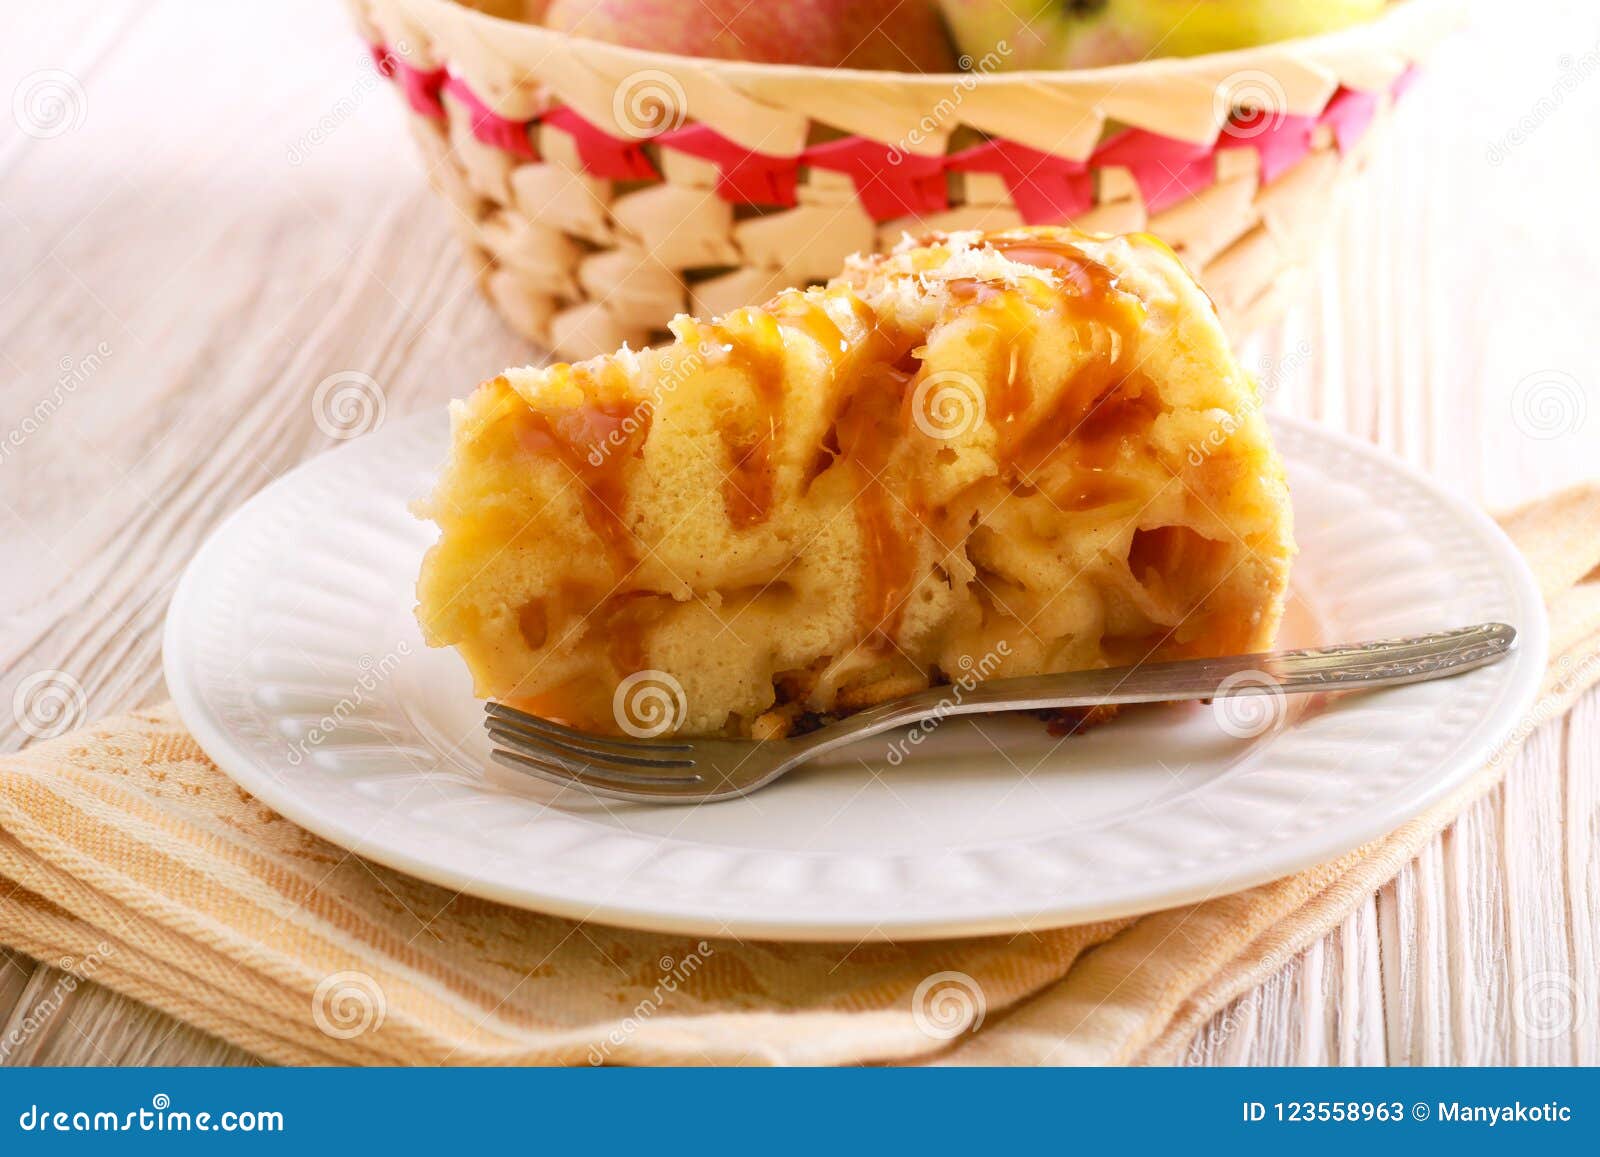 2 126 Apple Toffee Photos Free Royalty Free Stock Photos From Dreamstime